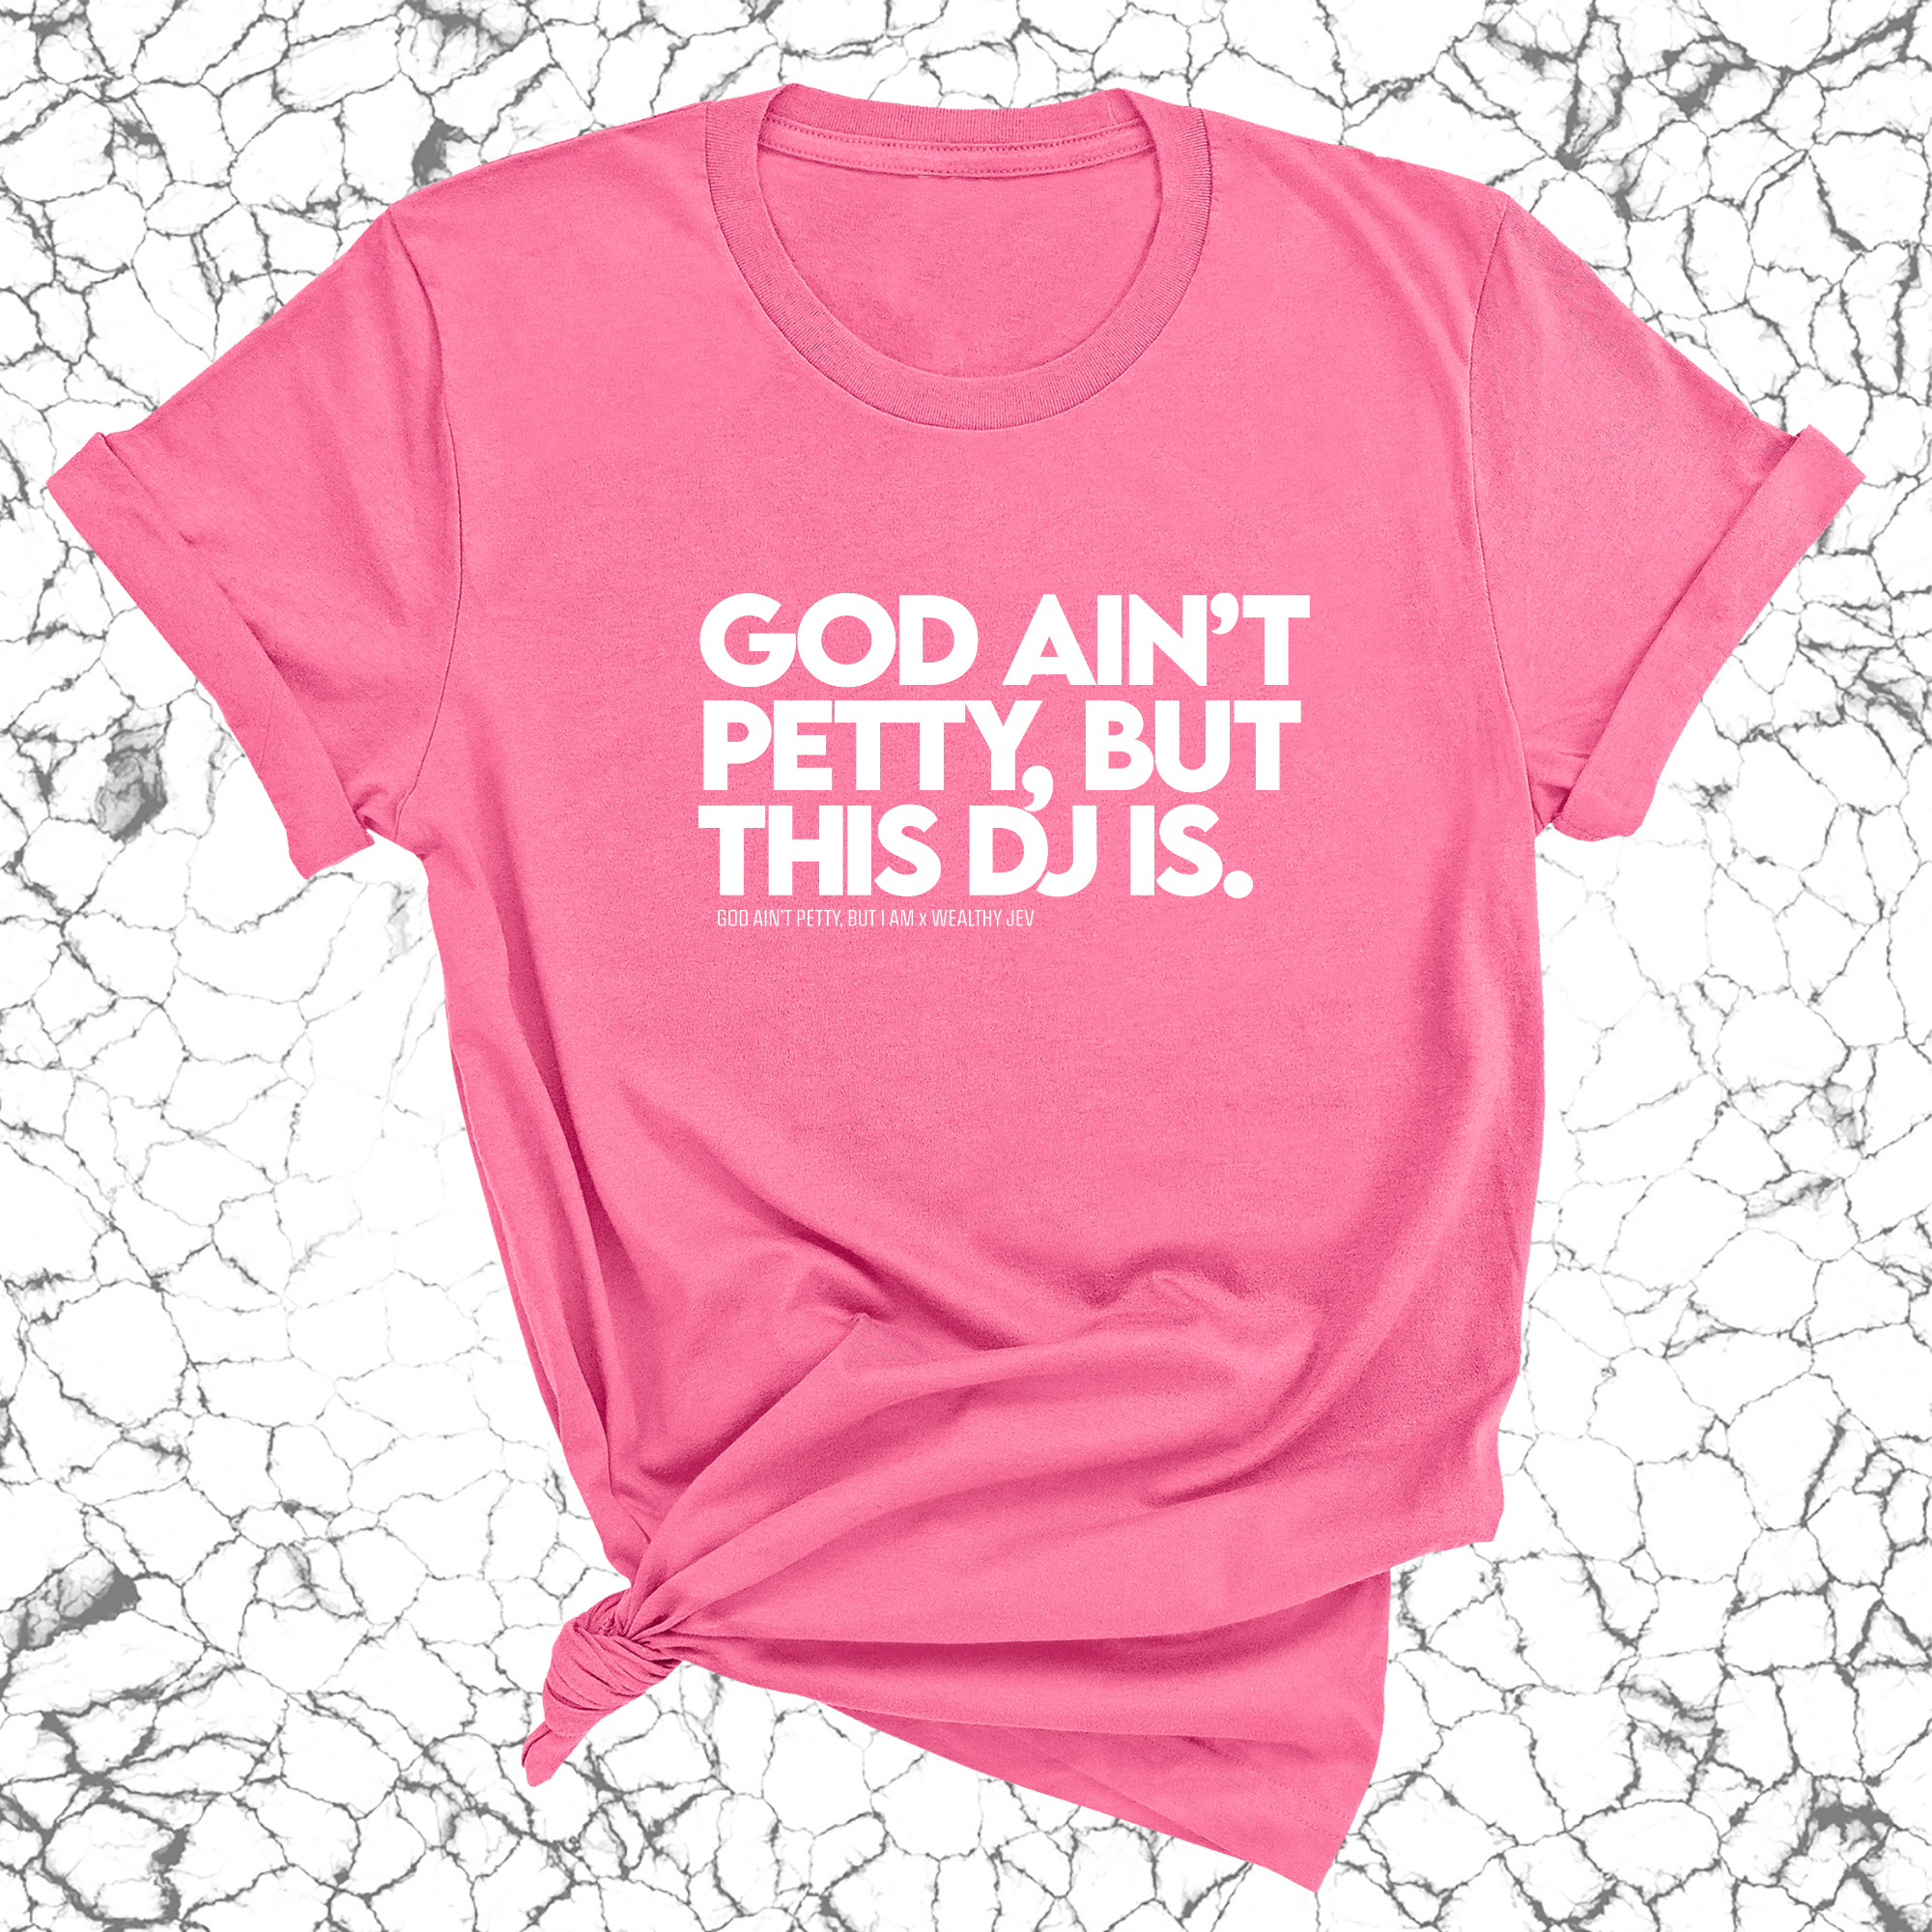 God ain't petty, but this DJ is Unisex Tee (God Ain't Petty, but I Am x Wealthy Jev Collab)-T-Shirt-The Original God Ain't Petty But I Am